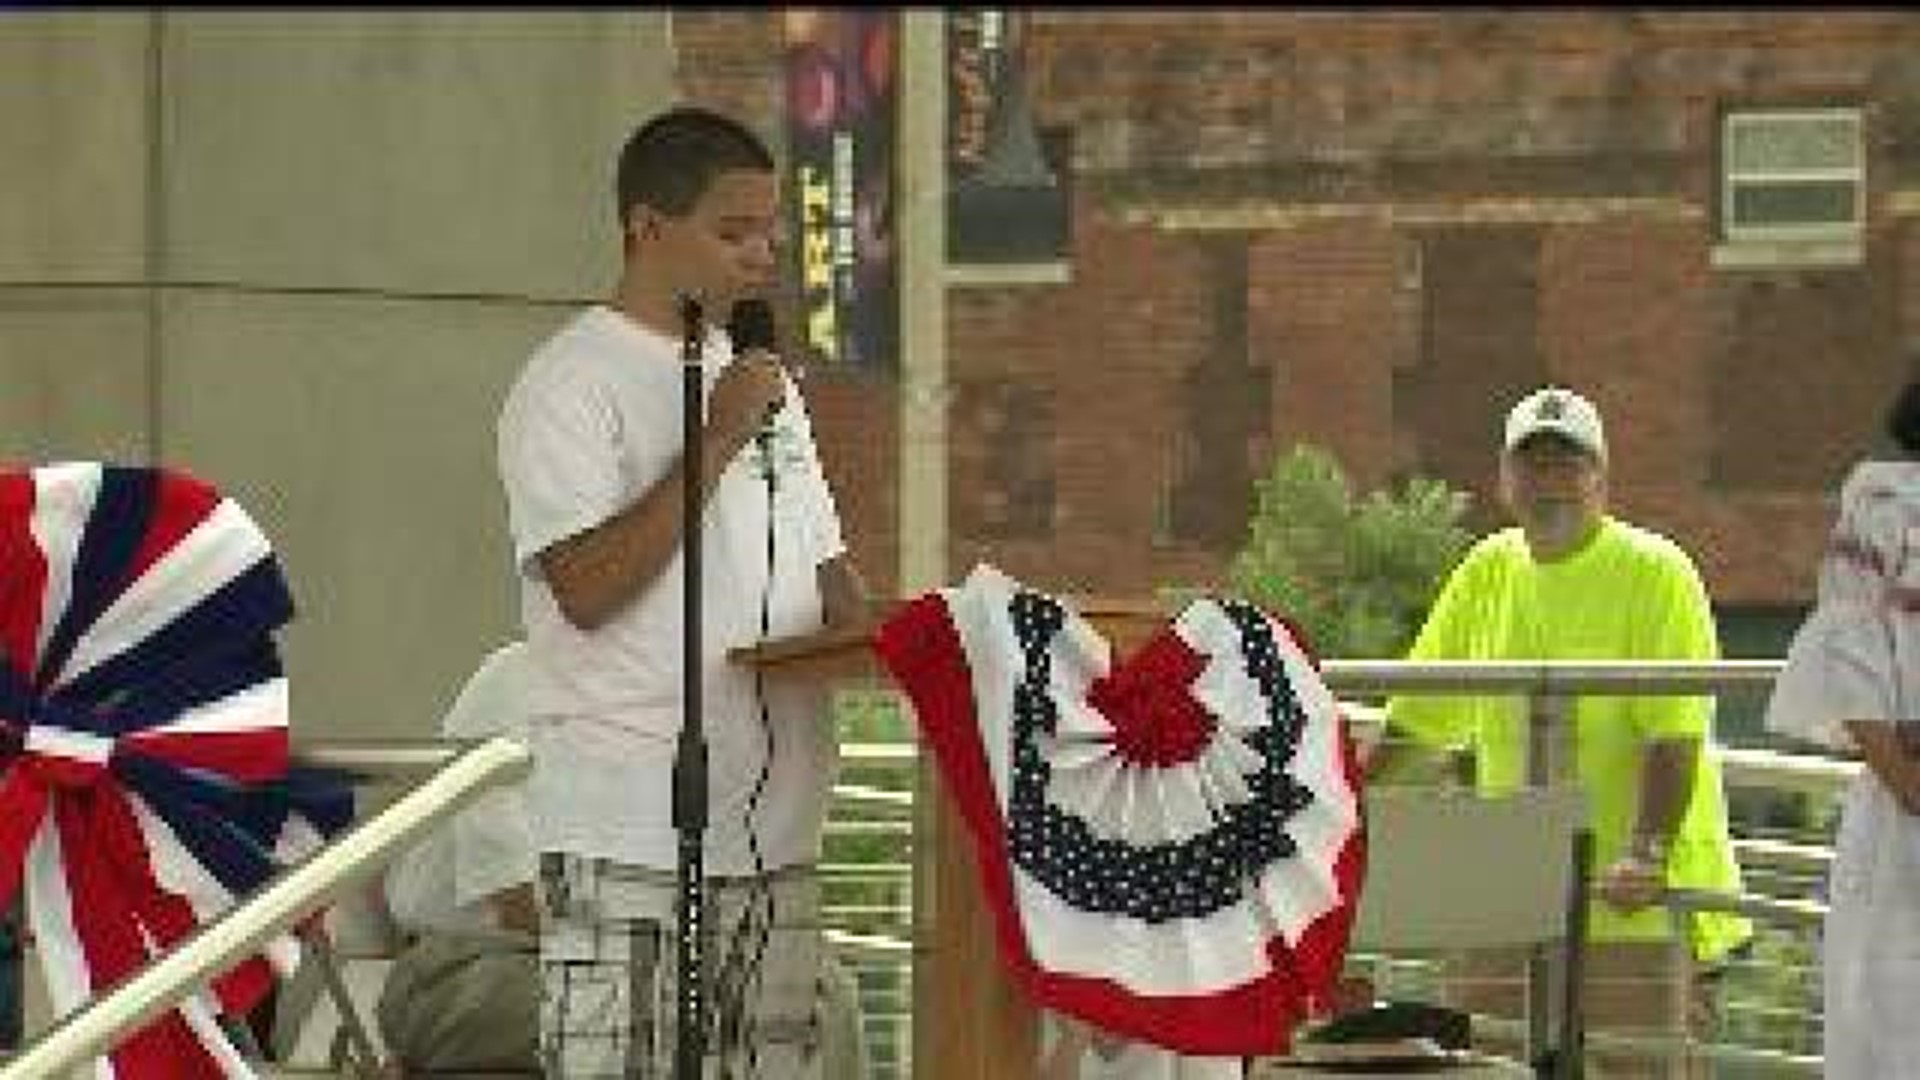 Immigration Reform Rally in Rock Island